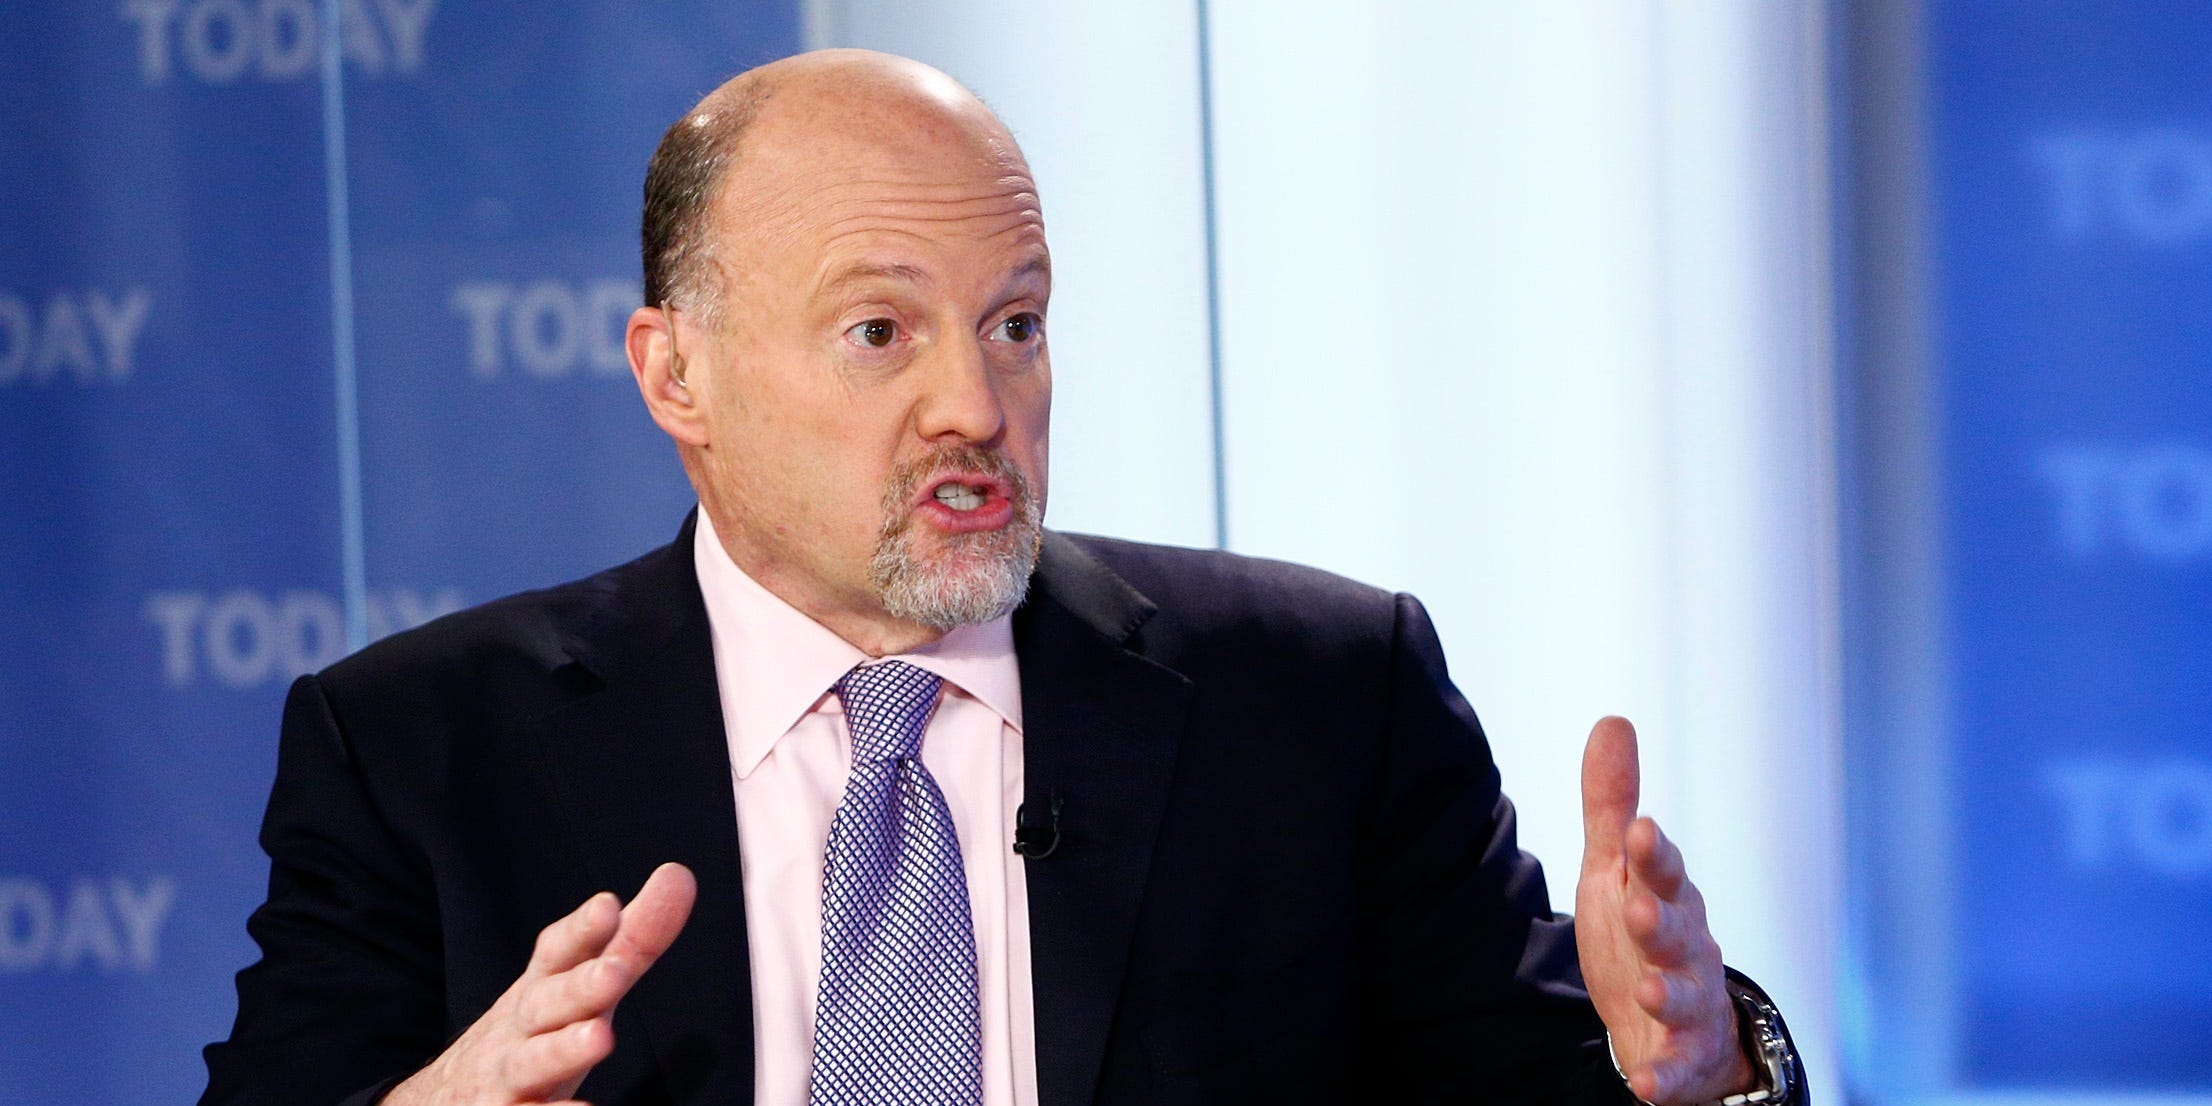 Jim Cramer appears on NBC News' "Today" show